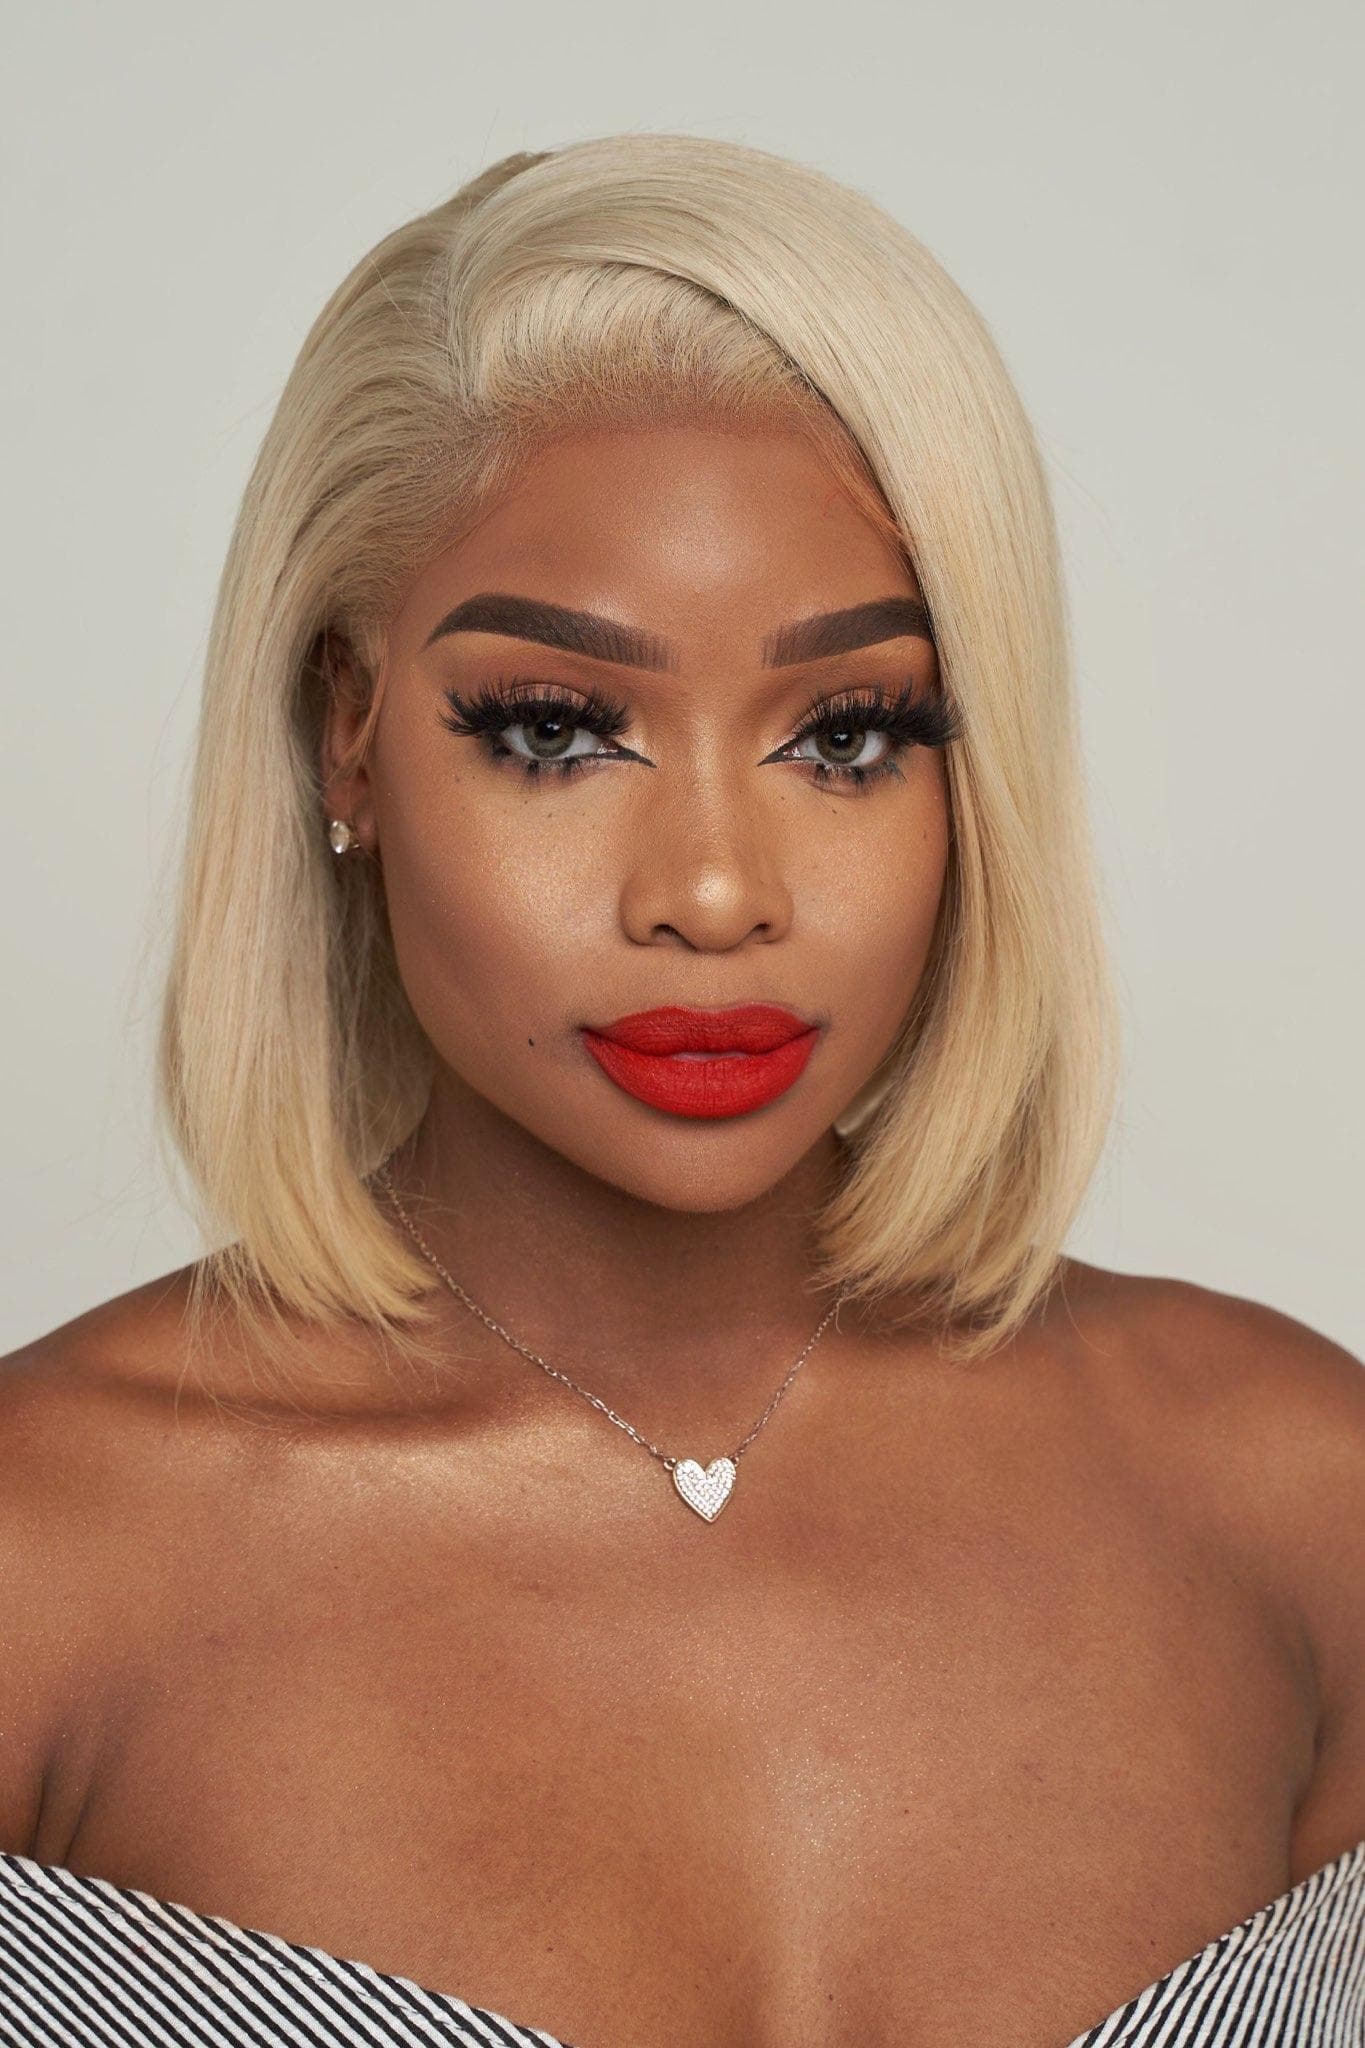 Shelsea Patton is currently a traveling celebrity makeup artist, based in North Hollywood, CA. In 2011, she attended the Fashion Institute of Technology in New York City, which is where her passion for the beauty and cosmetic industry flourished.